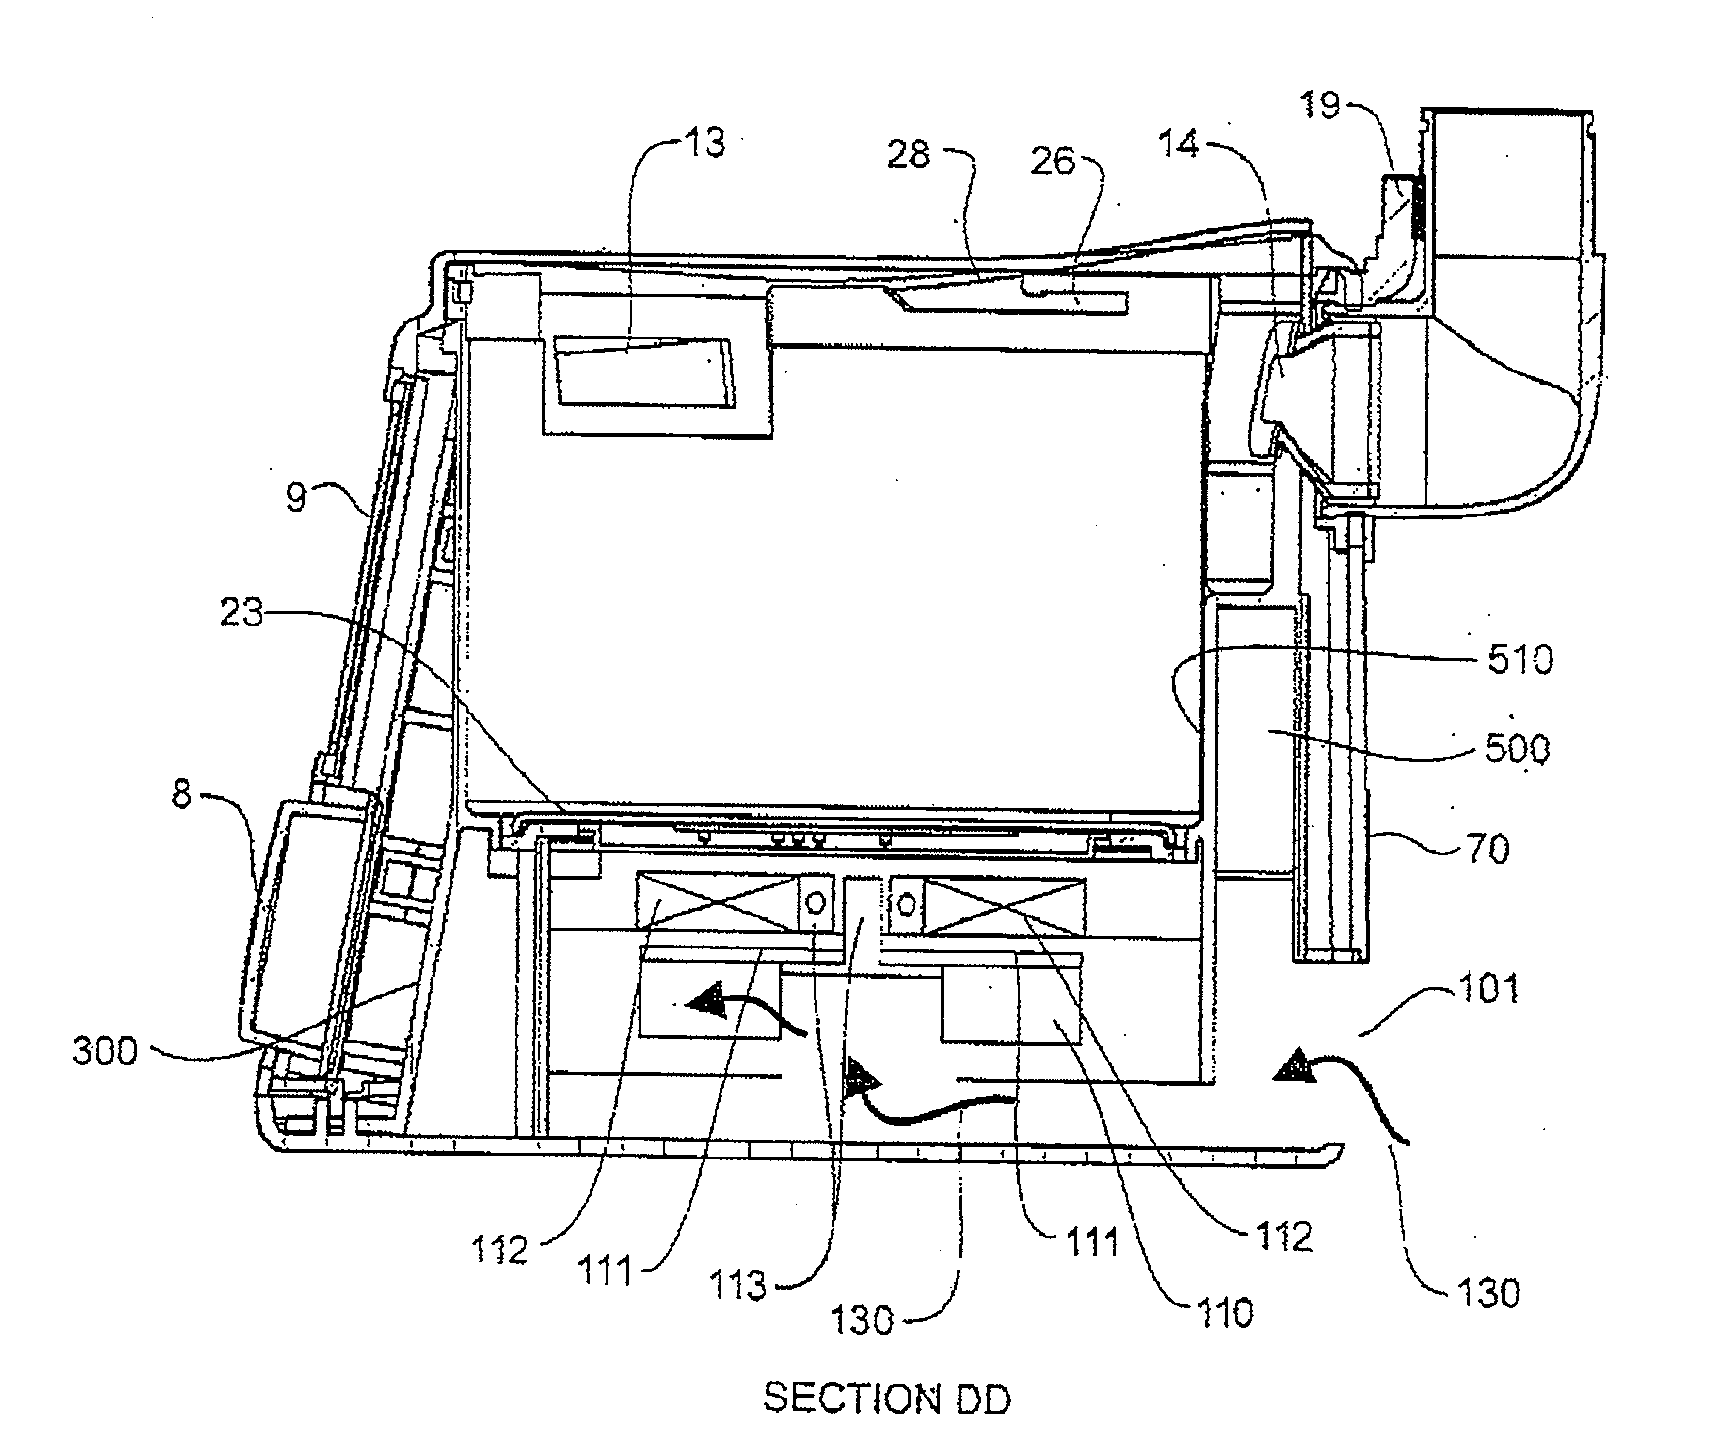 Method and apparatus for increasing therapy compliance